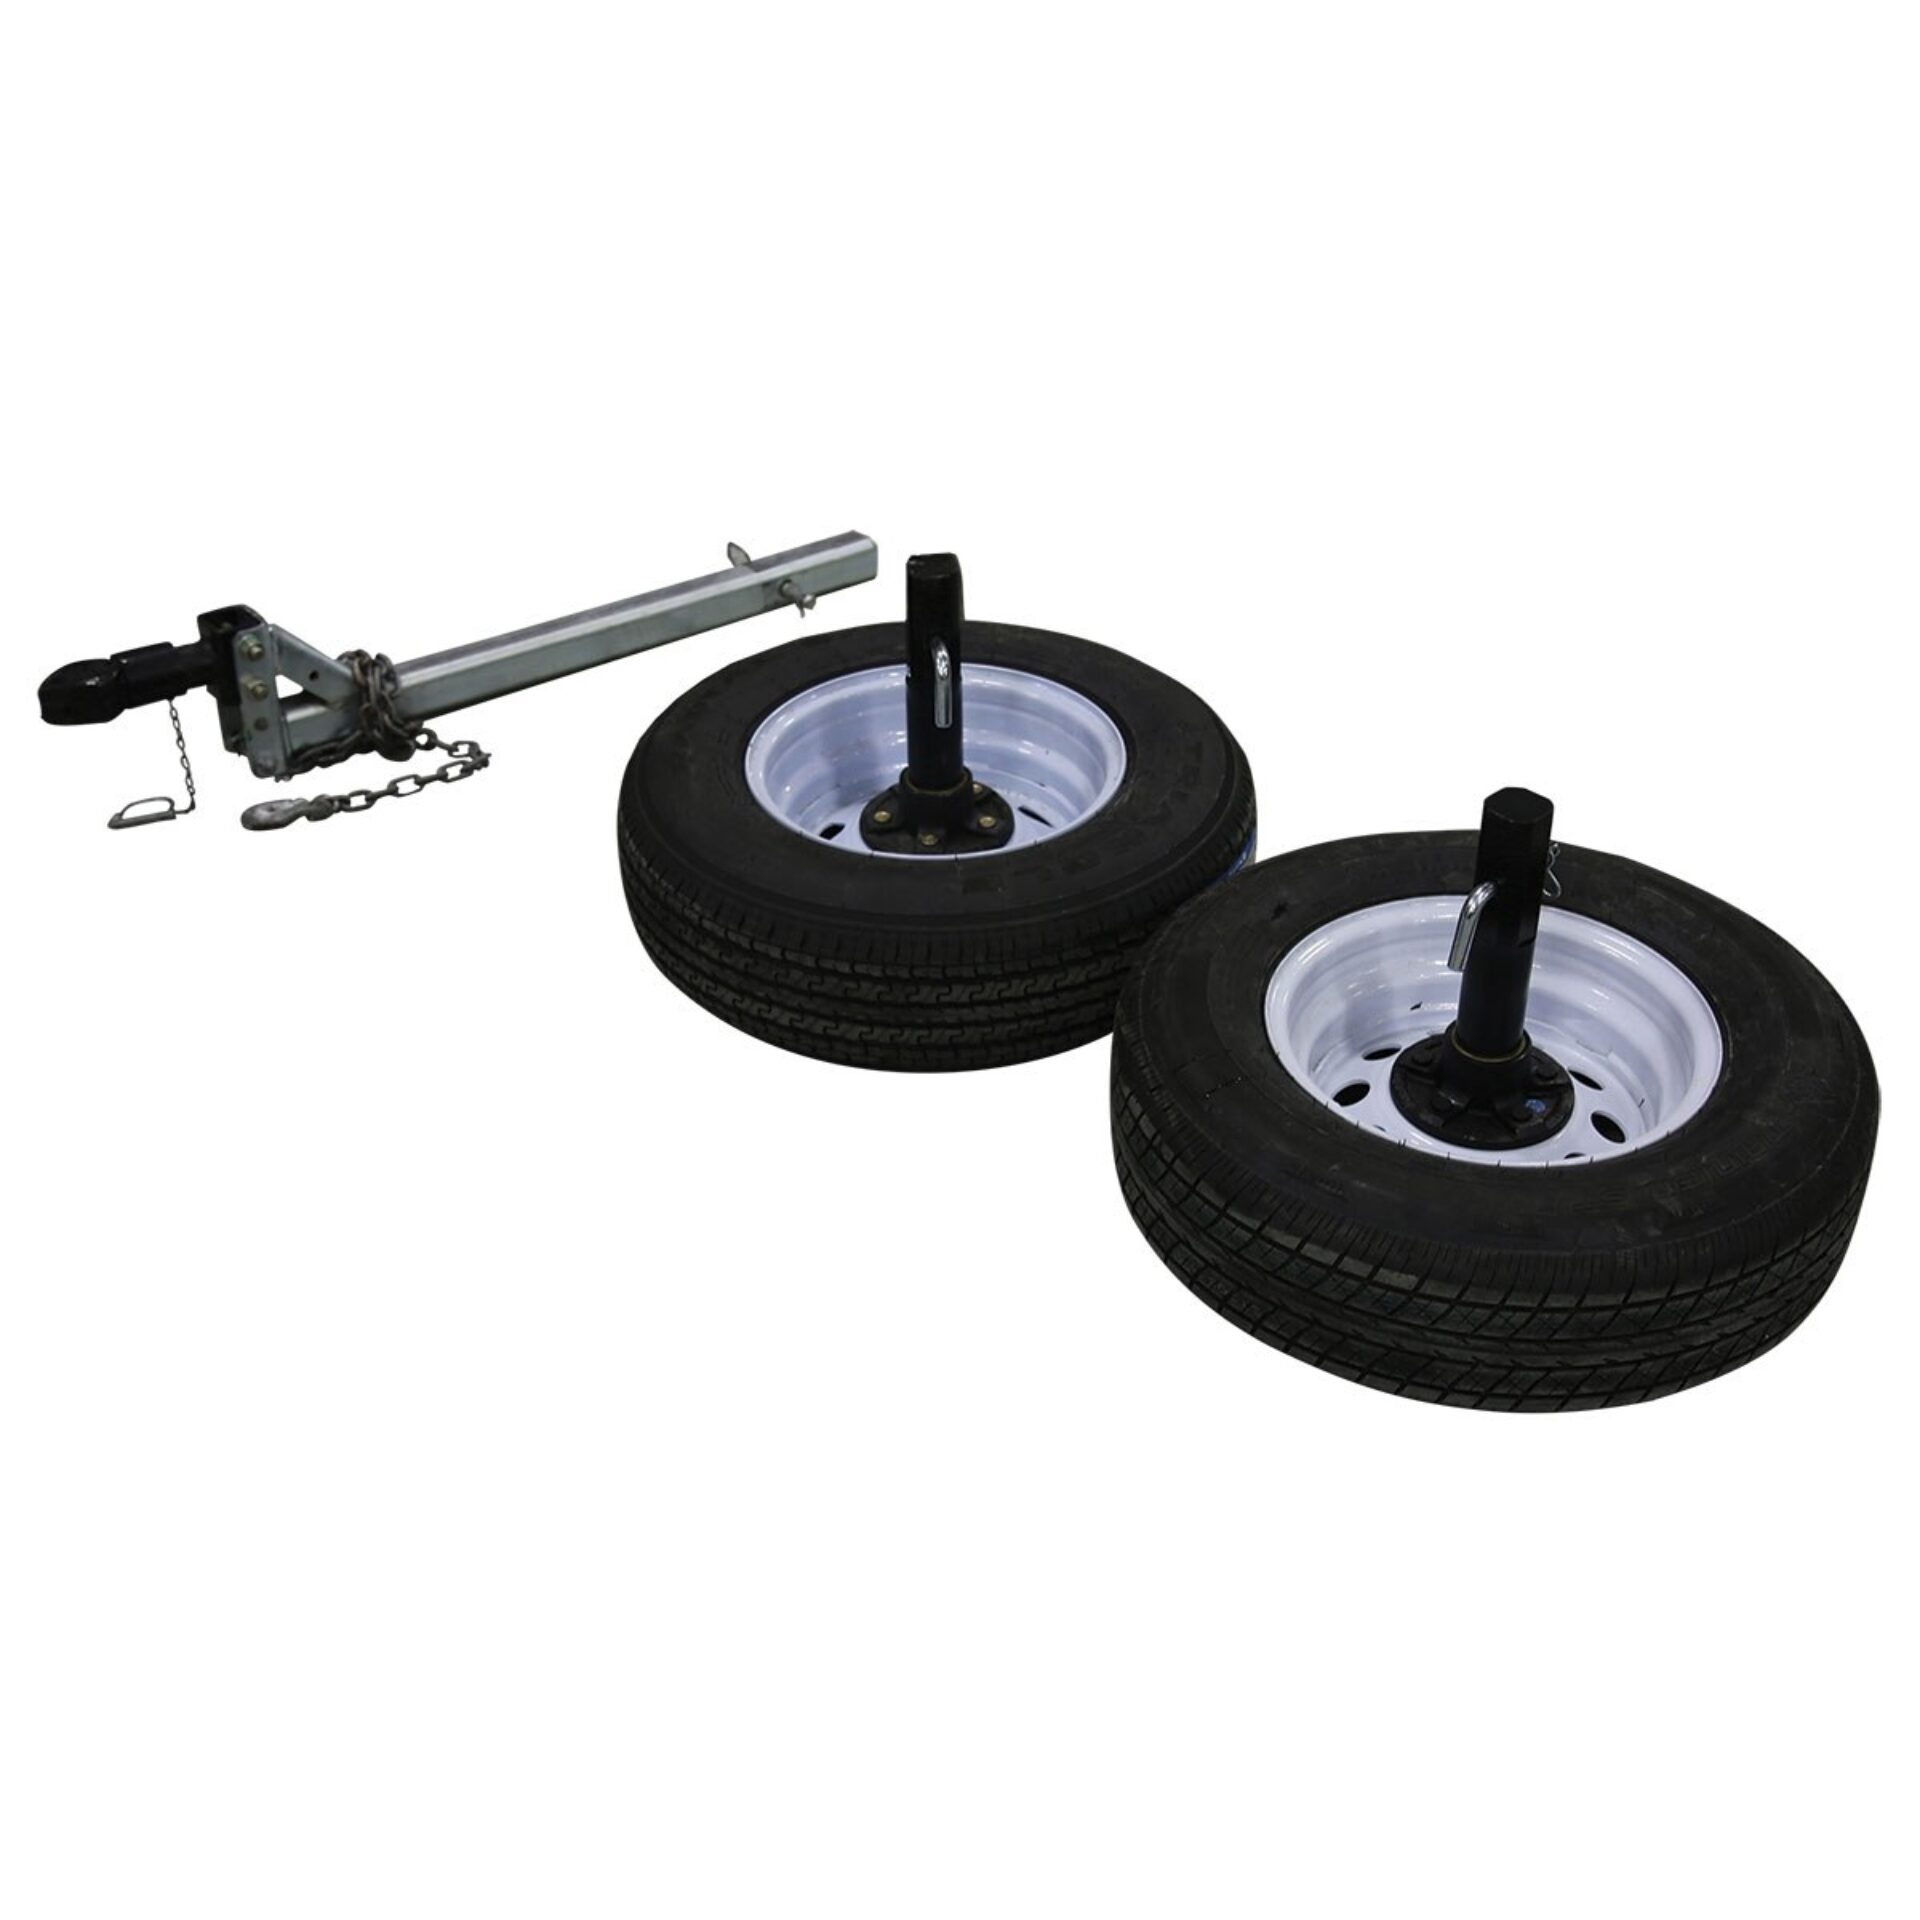 The General hydraulic cattle chute portable wheel kit on the ground